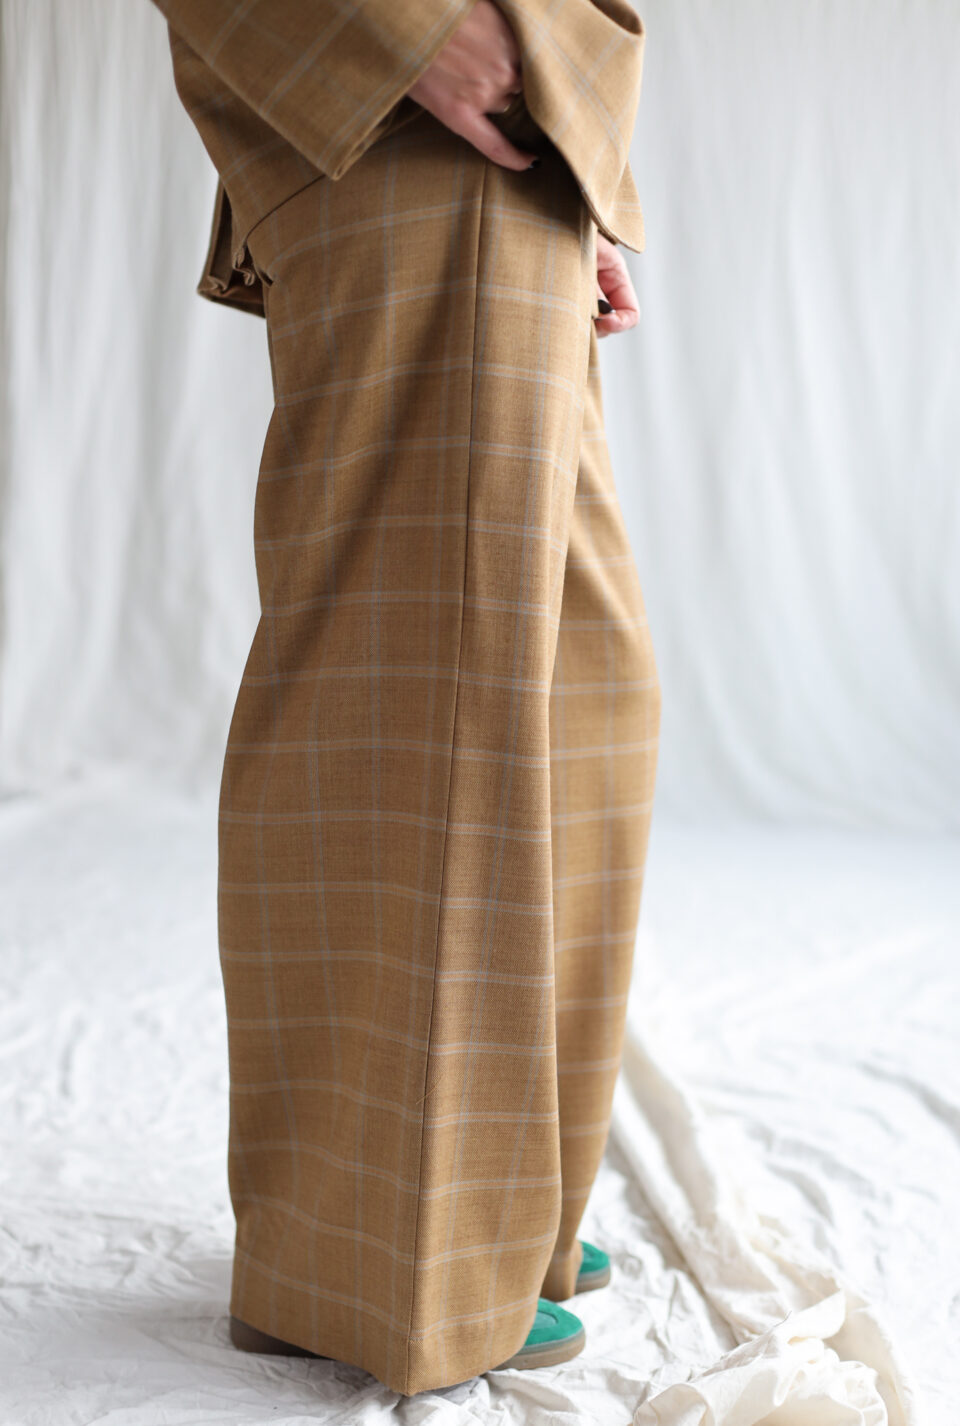 Wool plaid palazzo trousers | Trousers | Sustainable clothing | OffOn clothing